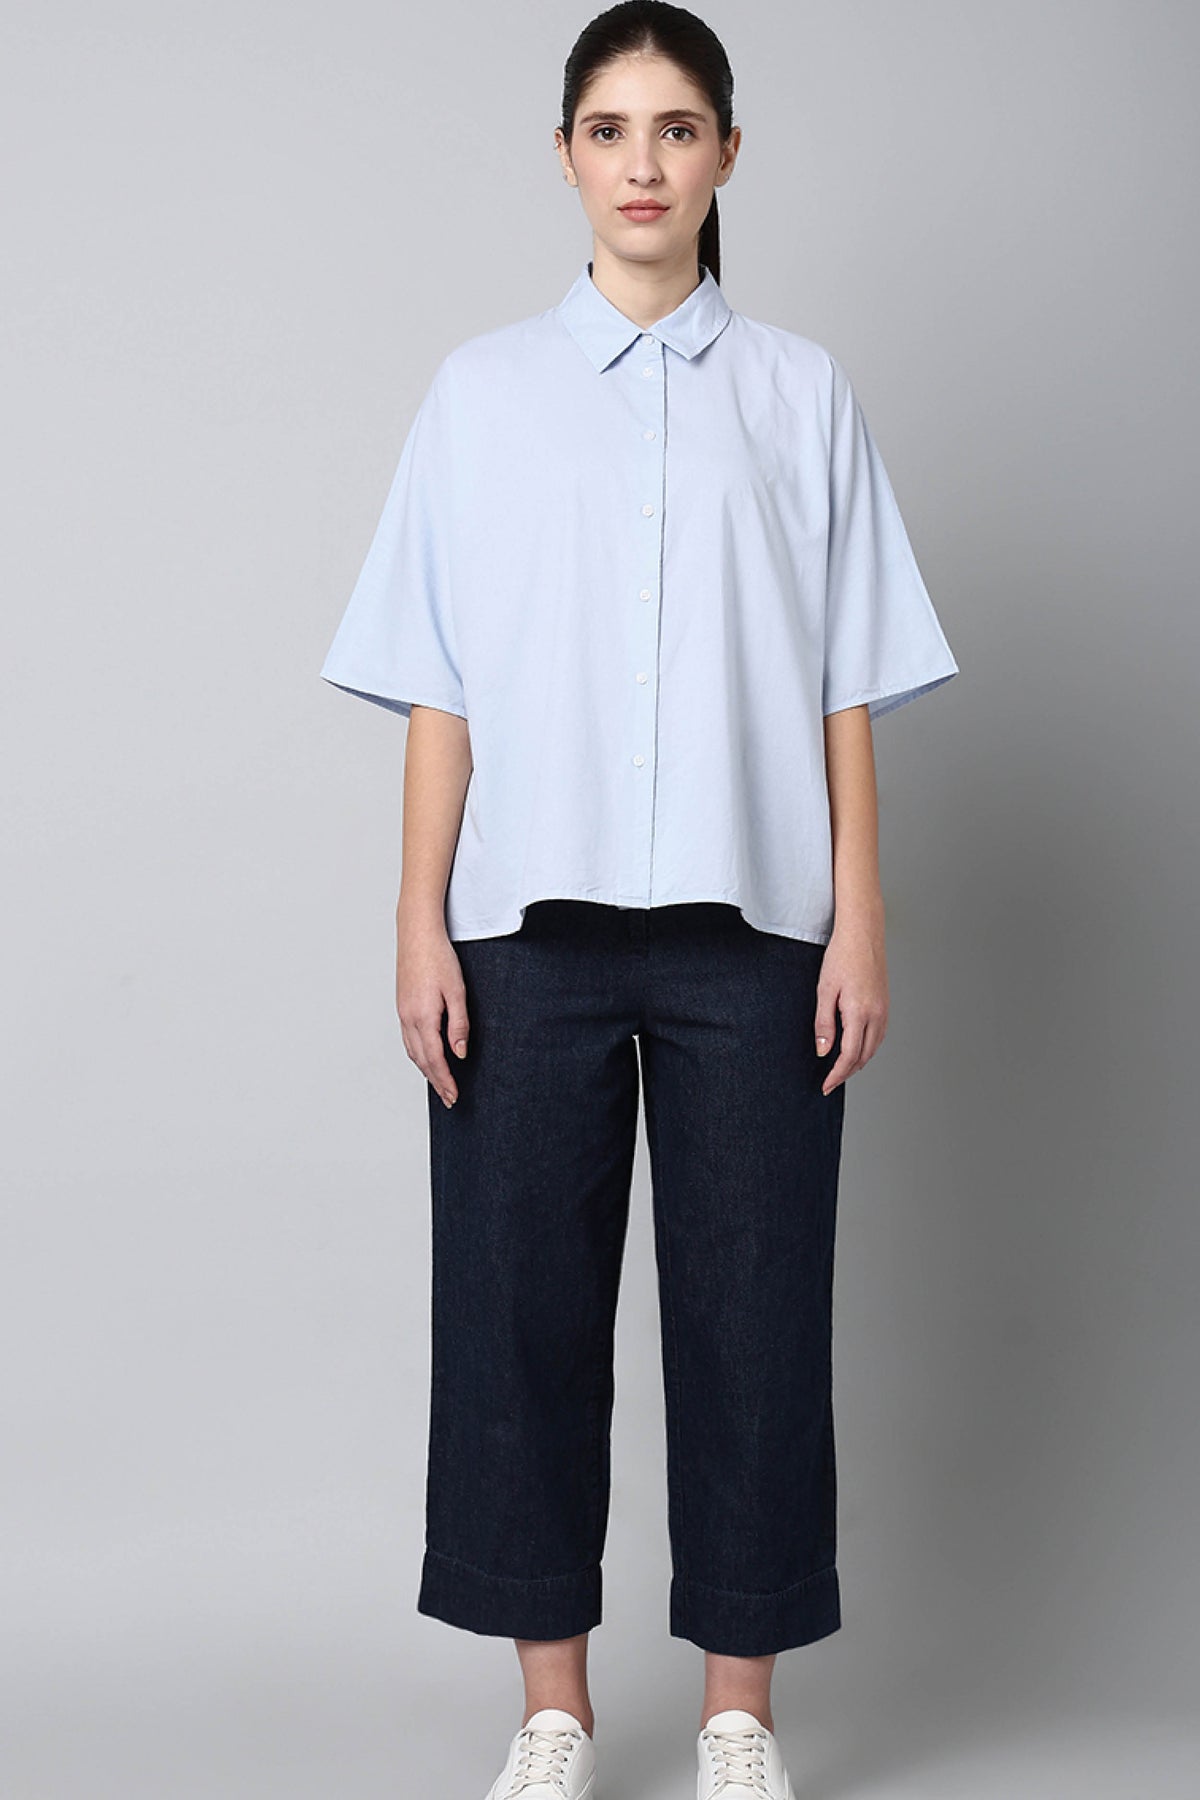 Cotton Sleeves Extended Blue Shirt